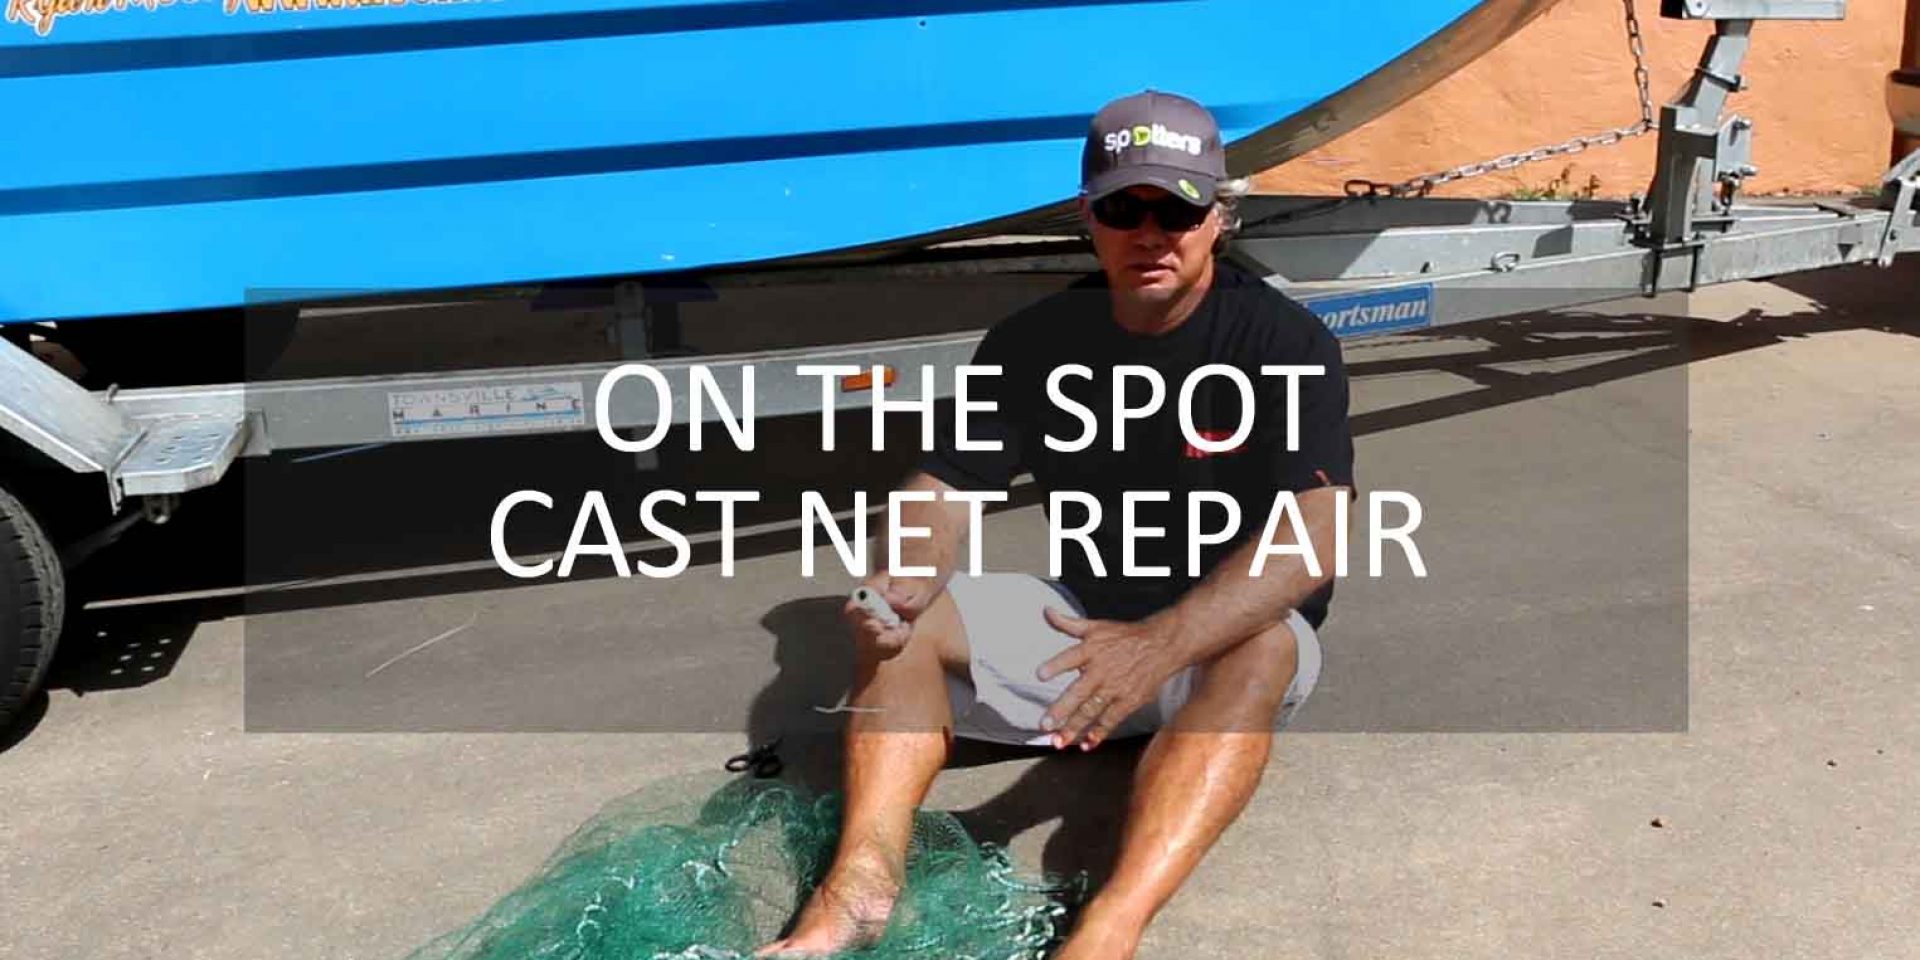 Cast_net_repair-with-text